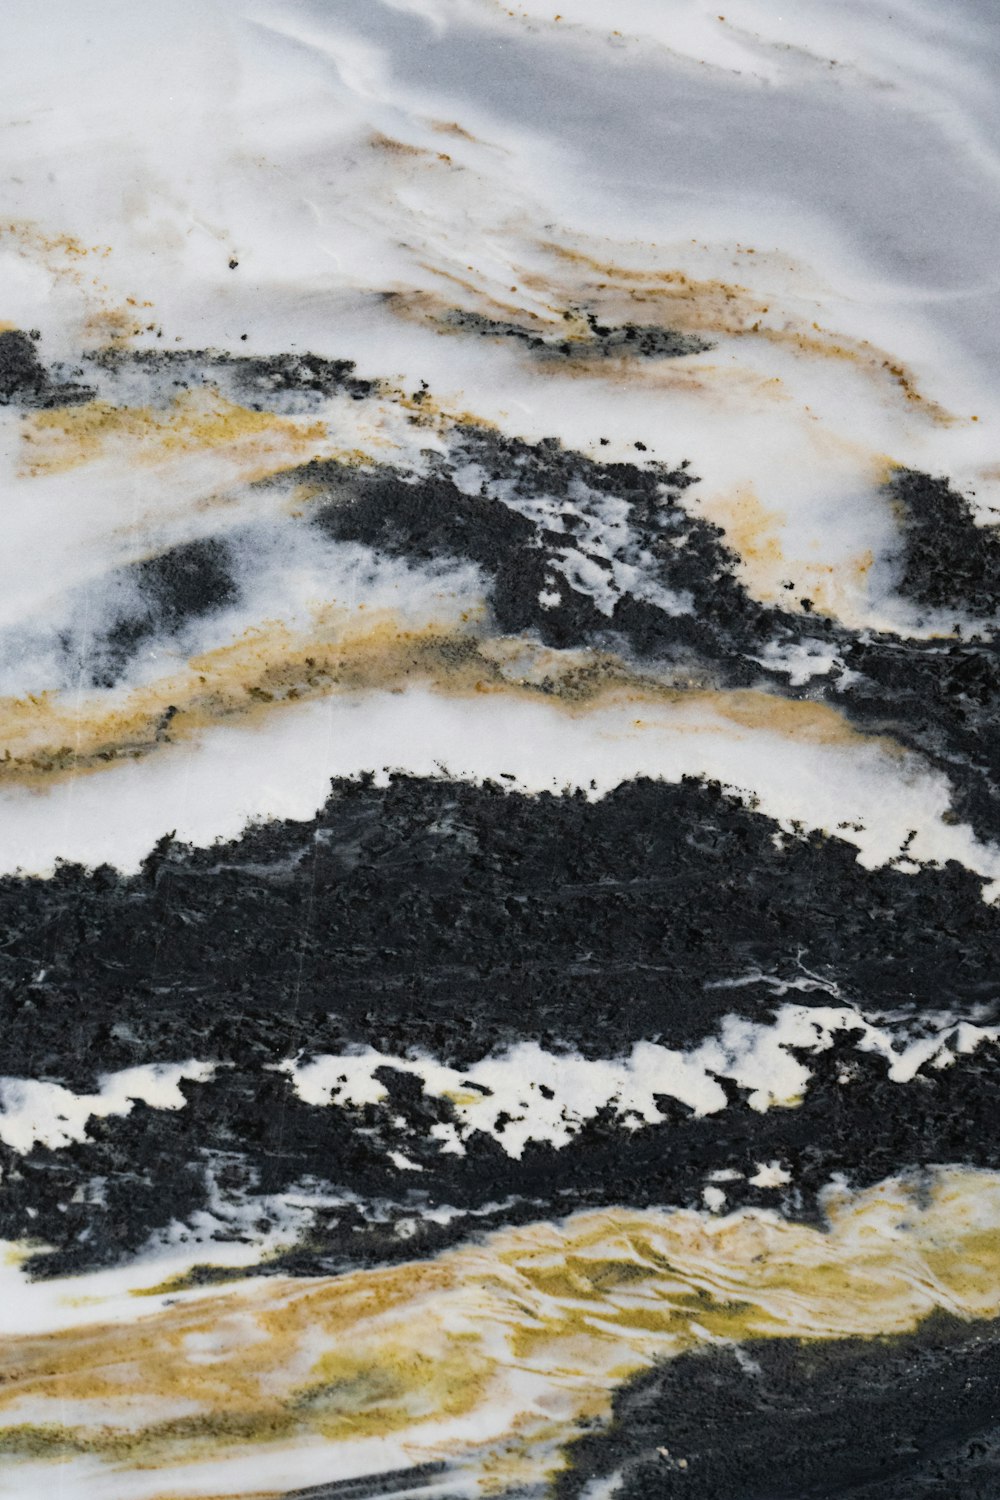 a close up of a black and white cake